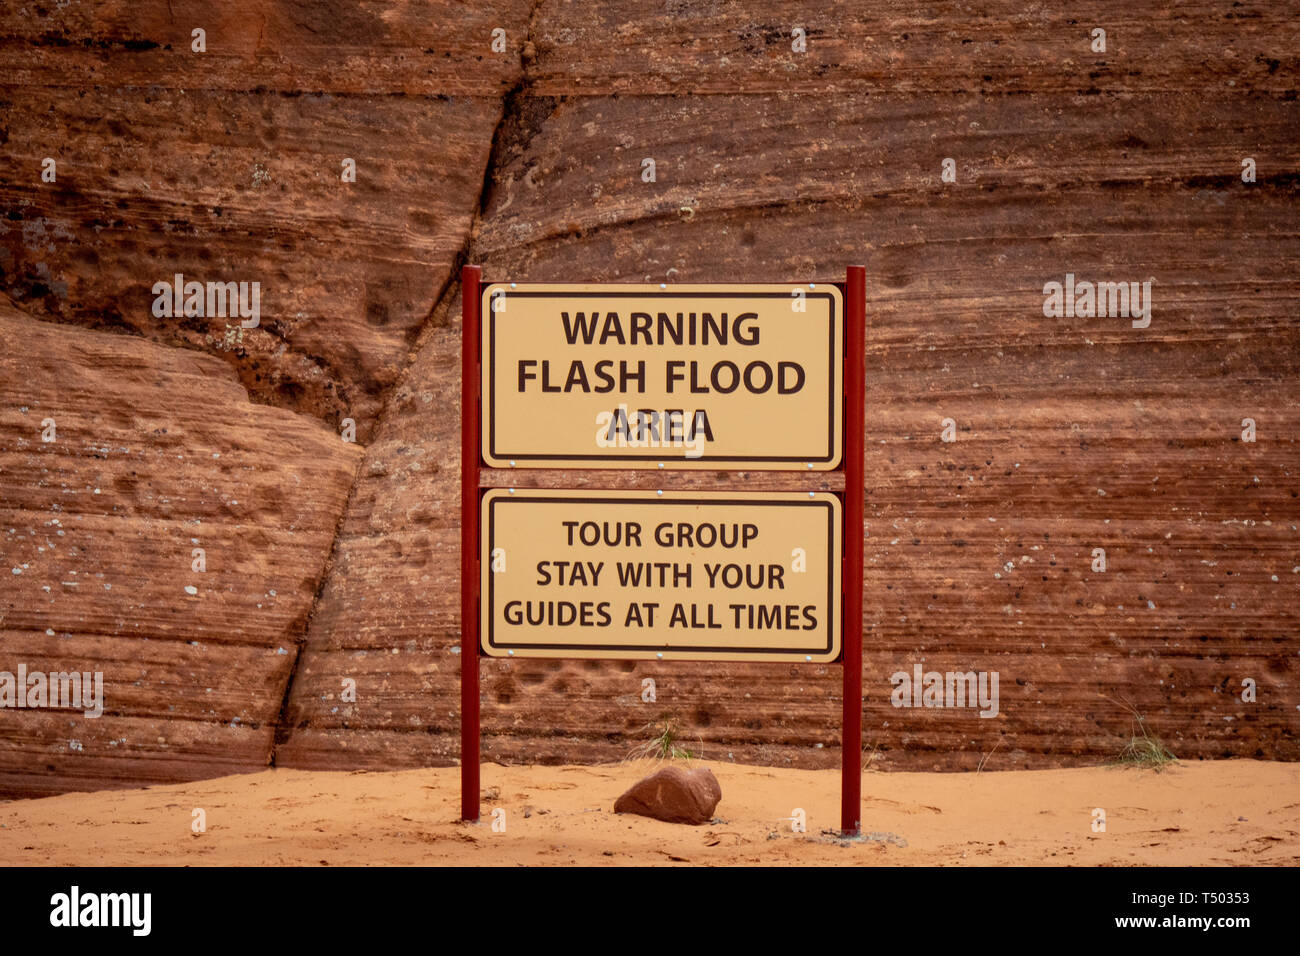 Floof Warning sign at Upper Antelope Canyon - PAGE, USA - MARCH 29, 2019 Stock Photo